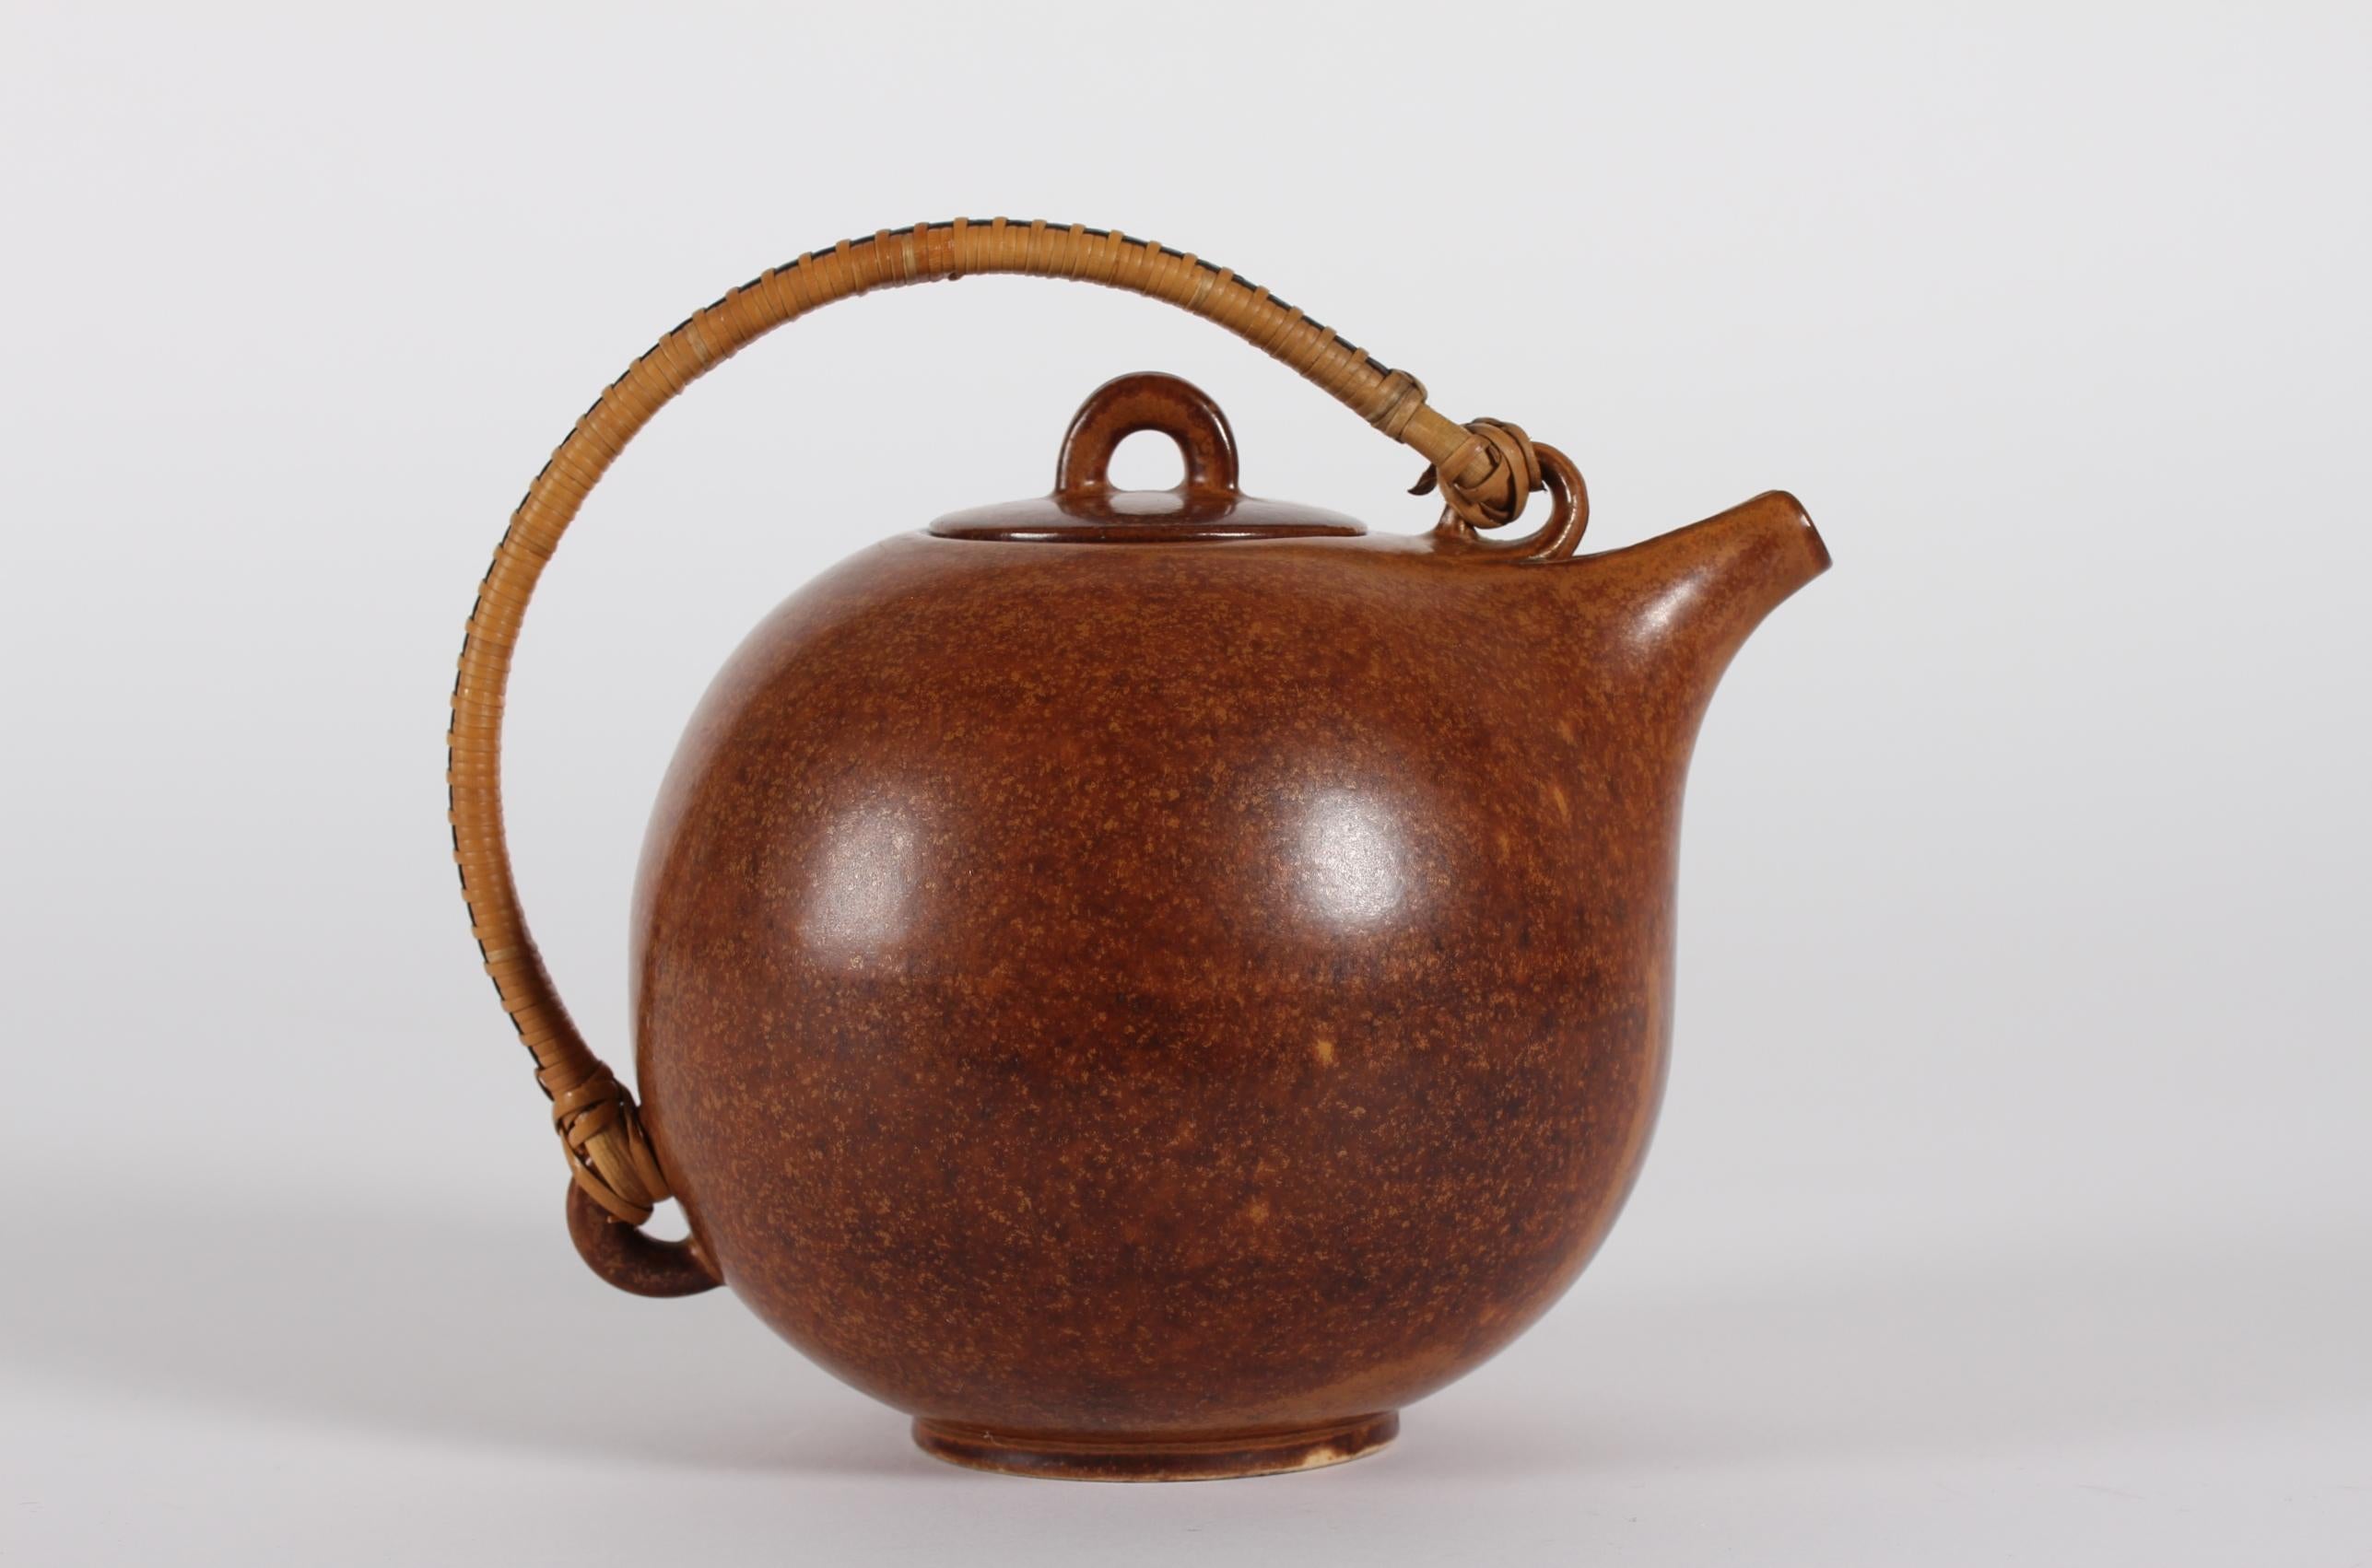 Globular ceramic teapot model no. 63 designed by the Danish ceramist Eva Stæhr Nielsen (1911-1976) and manufactured by Saxbo ceramic workshop

The teapot is decorated with glaze in yellow-brown ochre shades and has a bast handle 
Signed Saxbo II